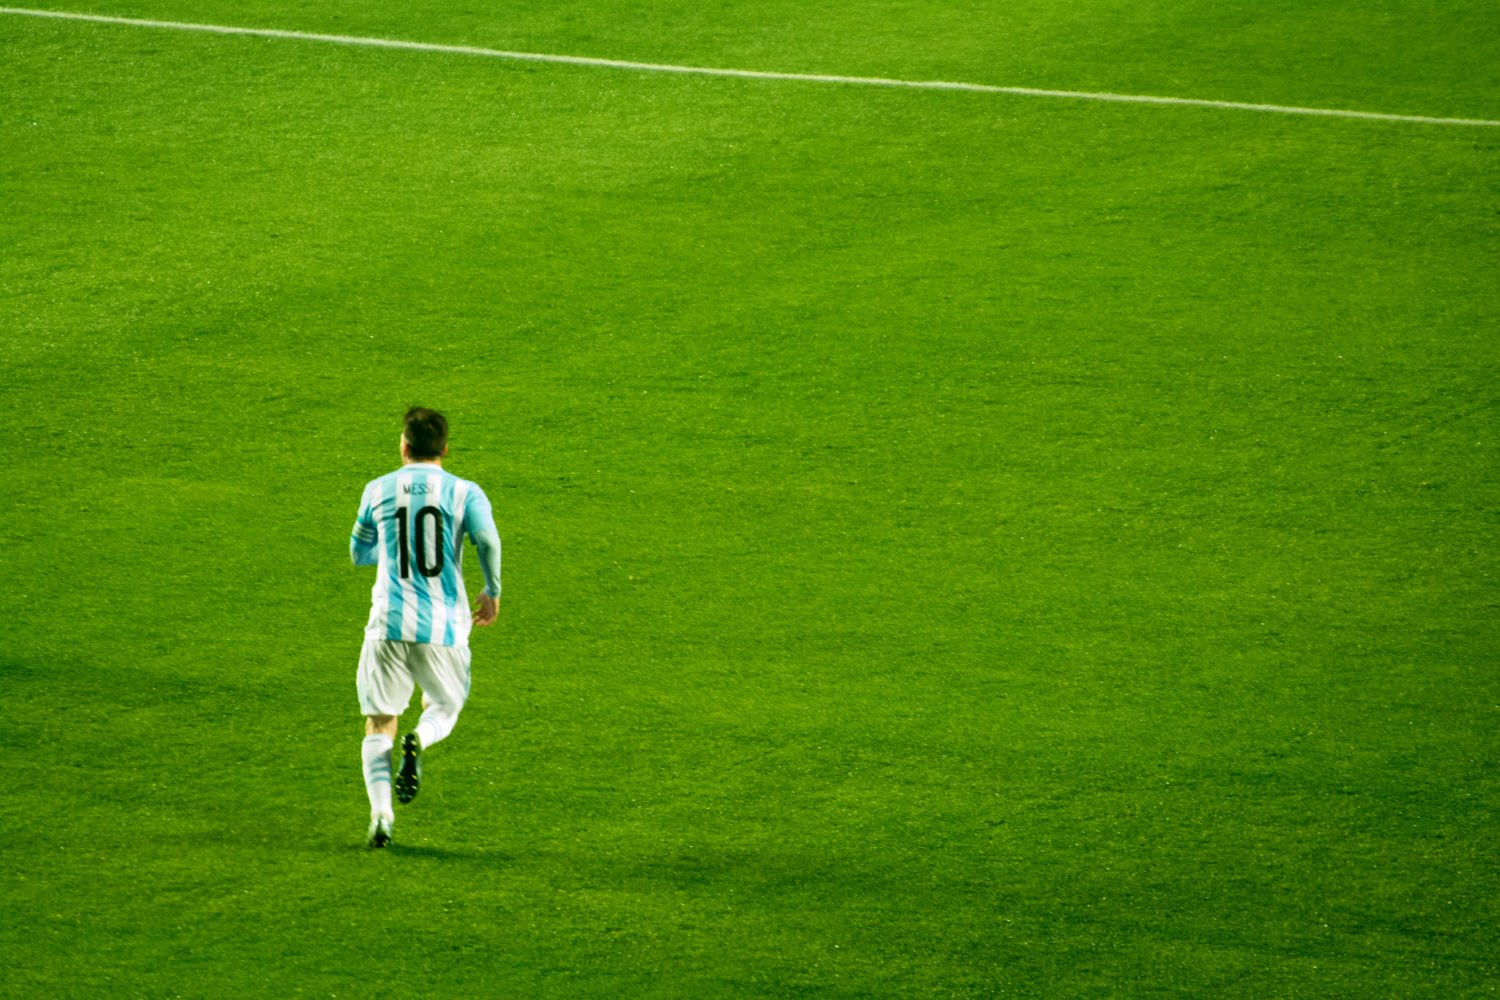 Lionel Messi on the pitch.